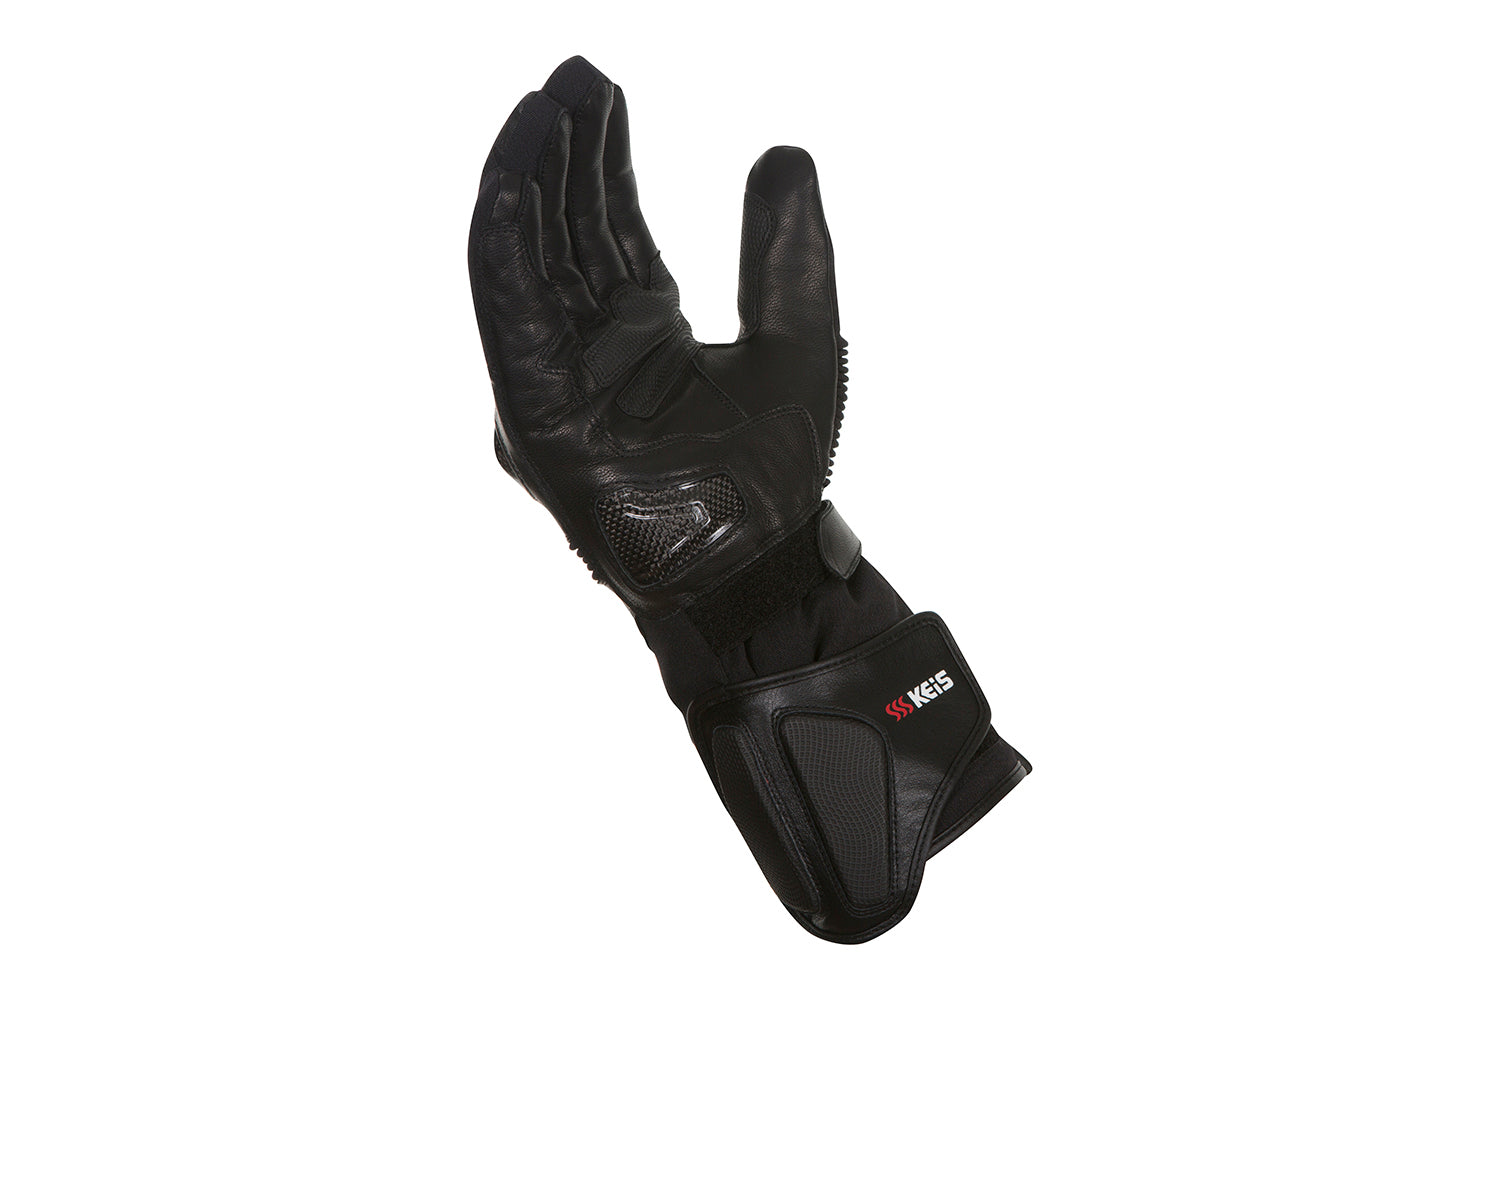 Heated Motorcycle Gloves - G502 Sport - Limited sizes